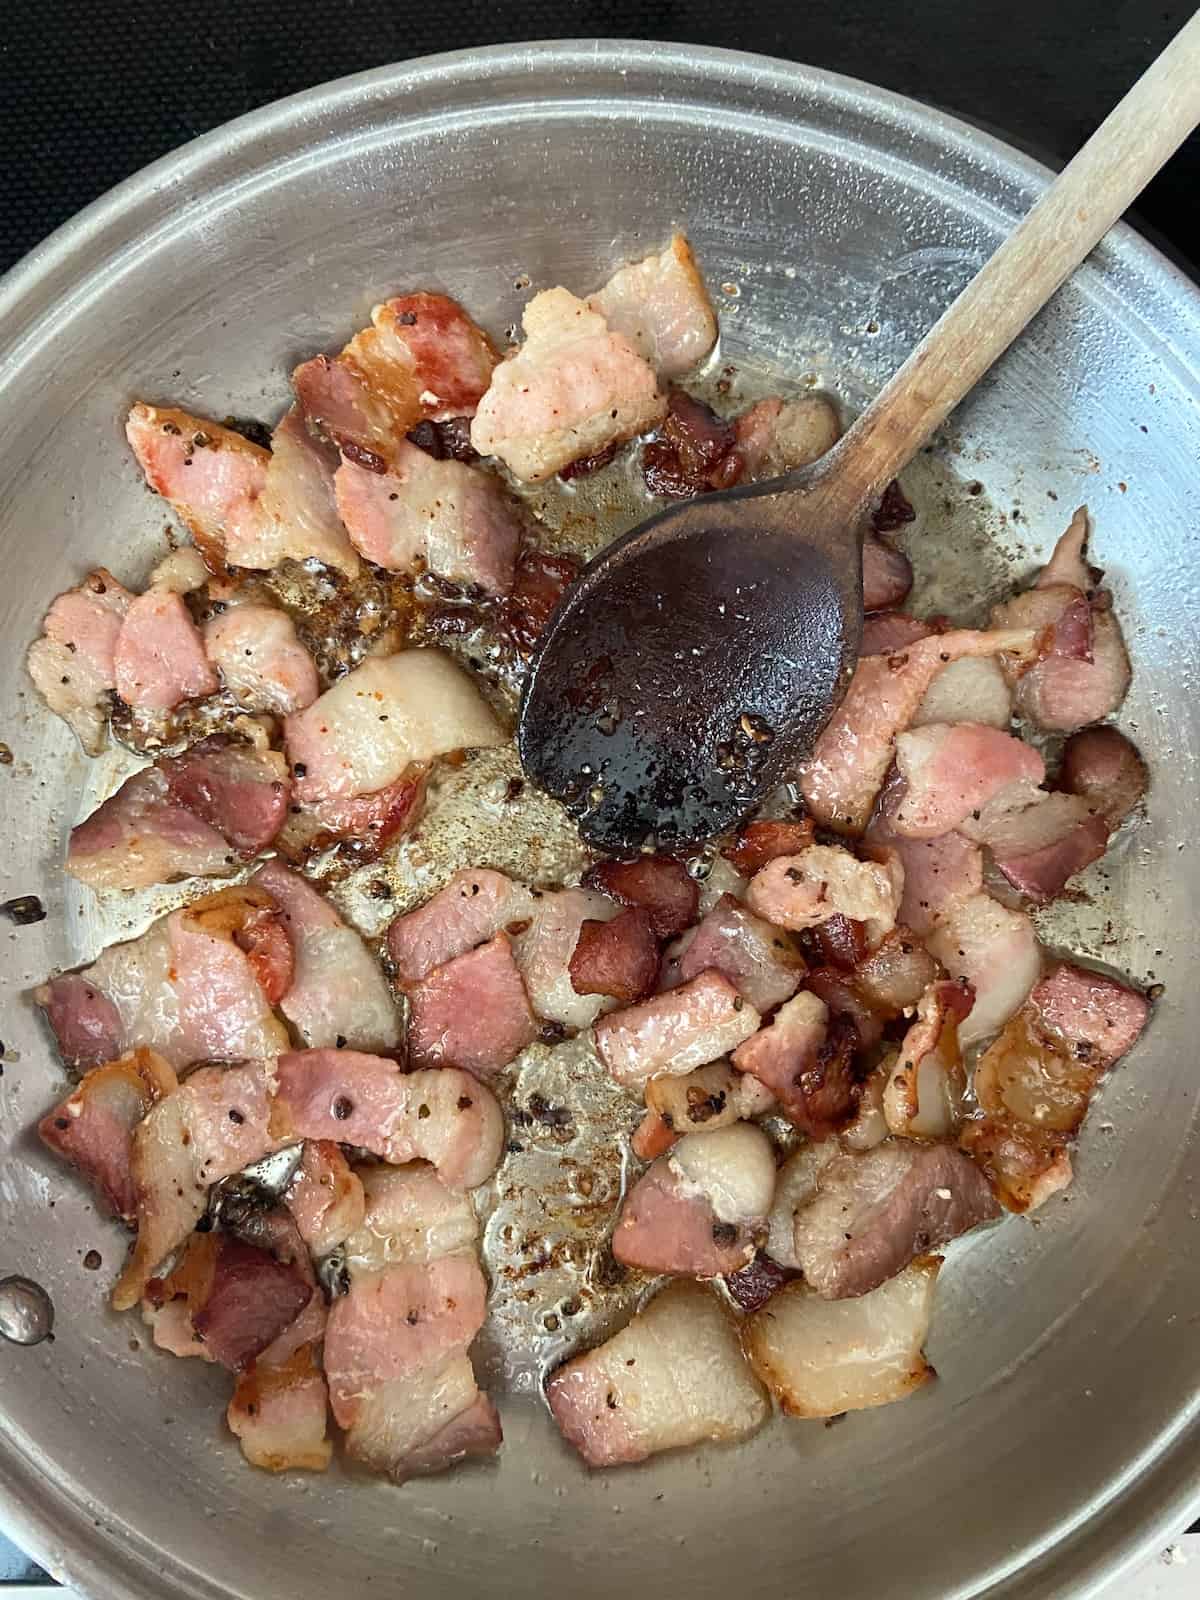 Bacon pieces in frying pan with a wooden spoon.